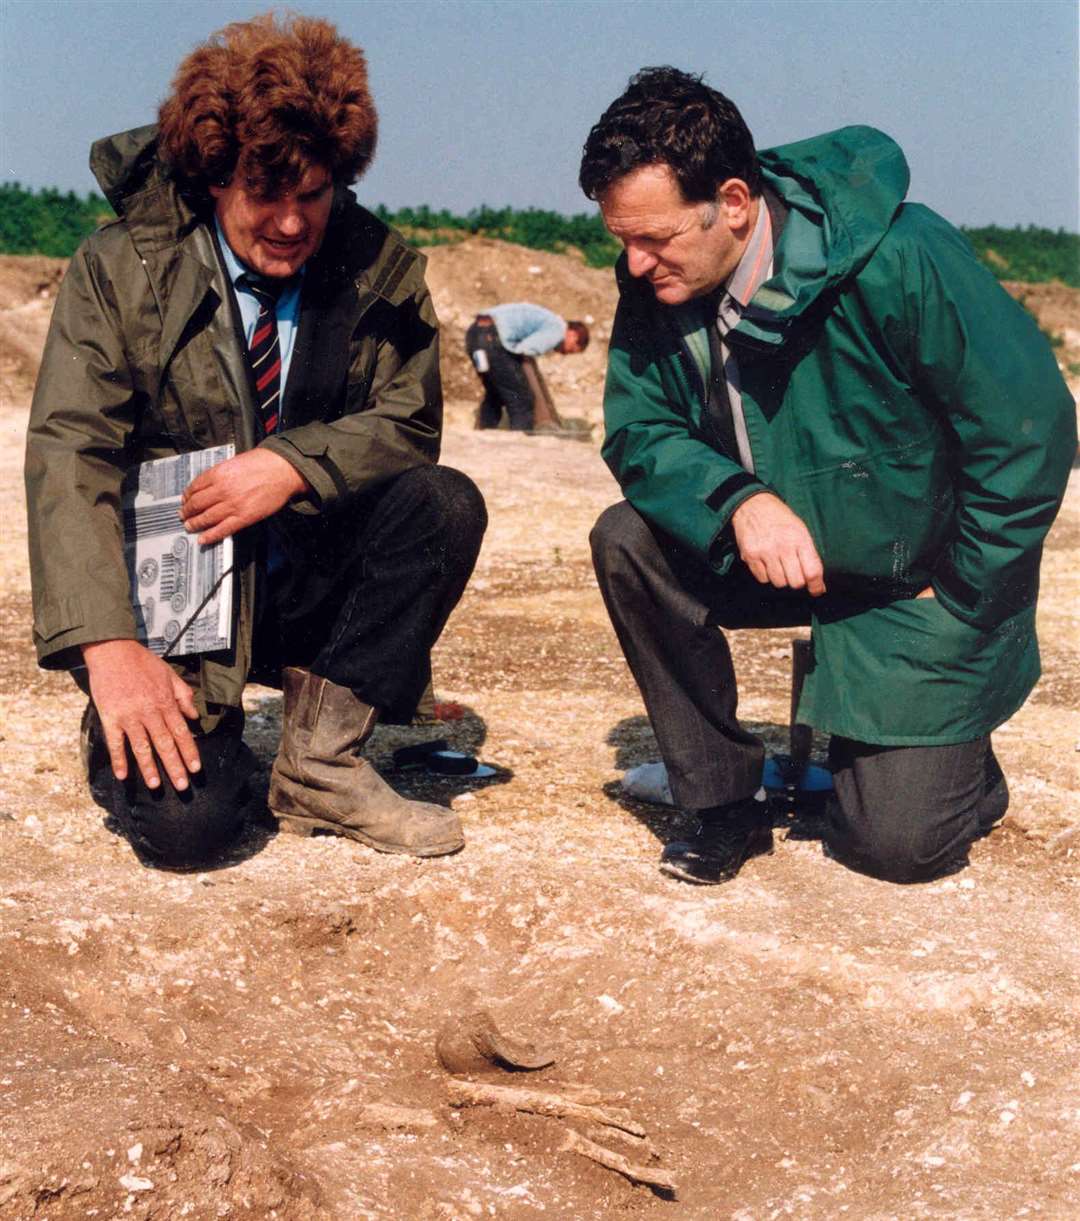 Archaeological dig at the construction of the new Thanet Way in 1994